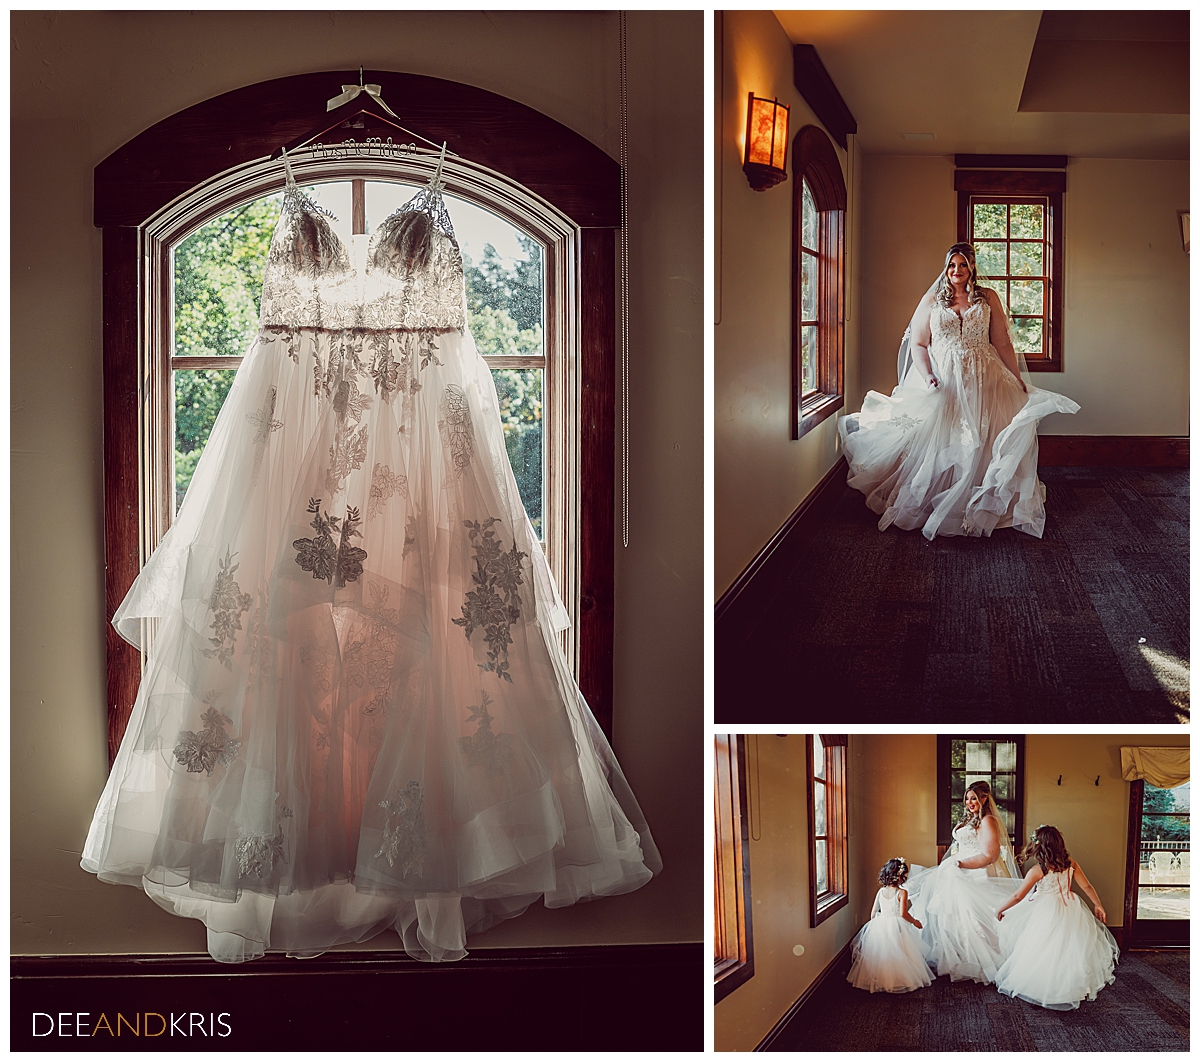 Three images: Left image of bride's dress hanging in arched window. Right top image of bride in her dress twirling the layers in front of window. Right bottom image of Bride with two flower girls twirling in their dresses in front of window.